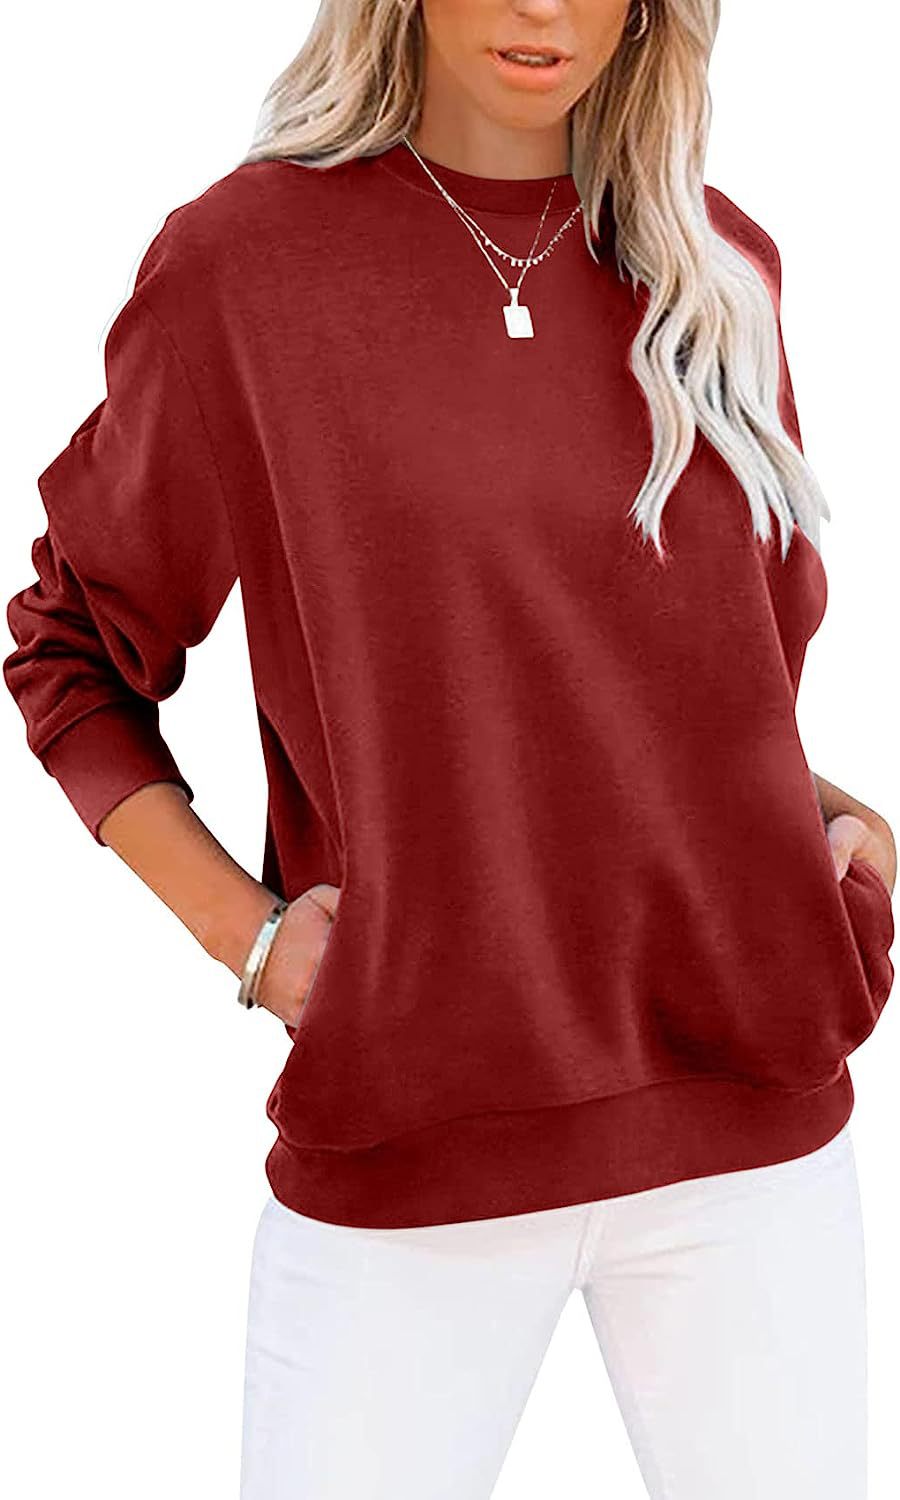 Women's Fashion Casual Round Neck Sports Long-sleeved Top